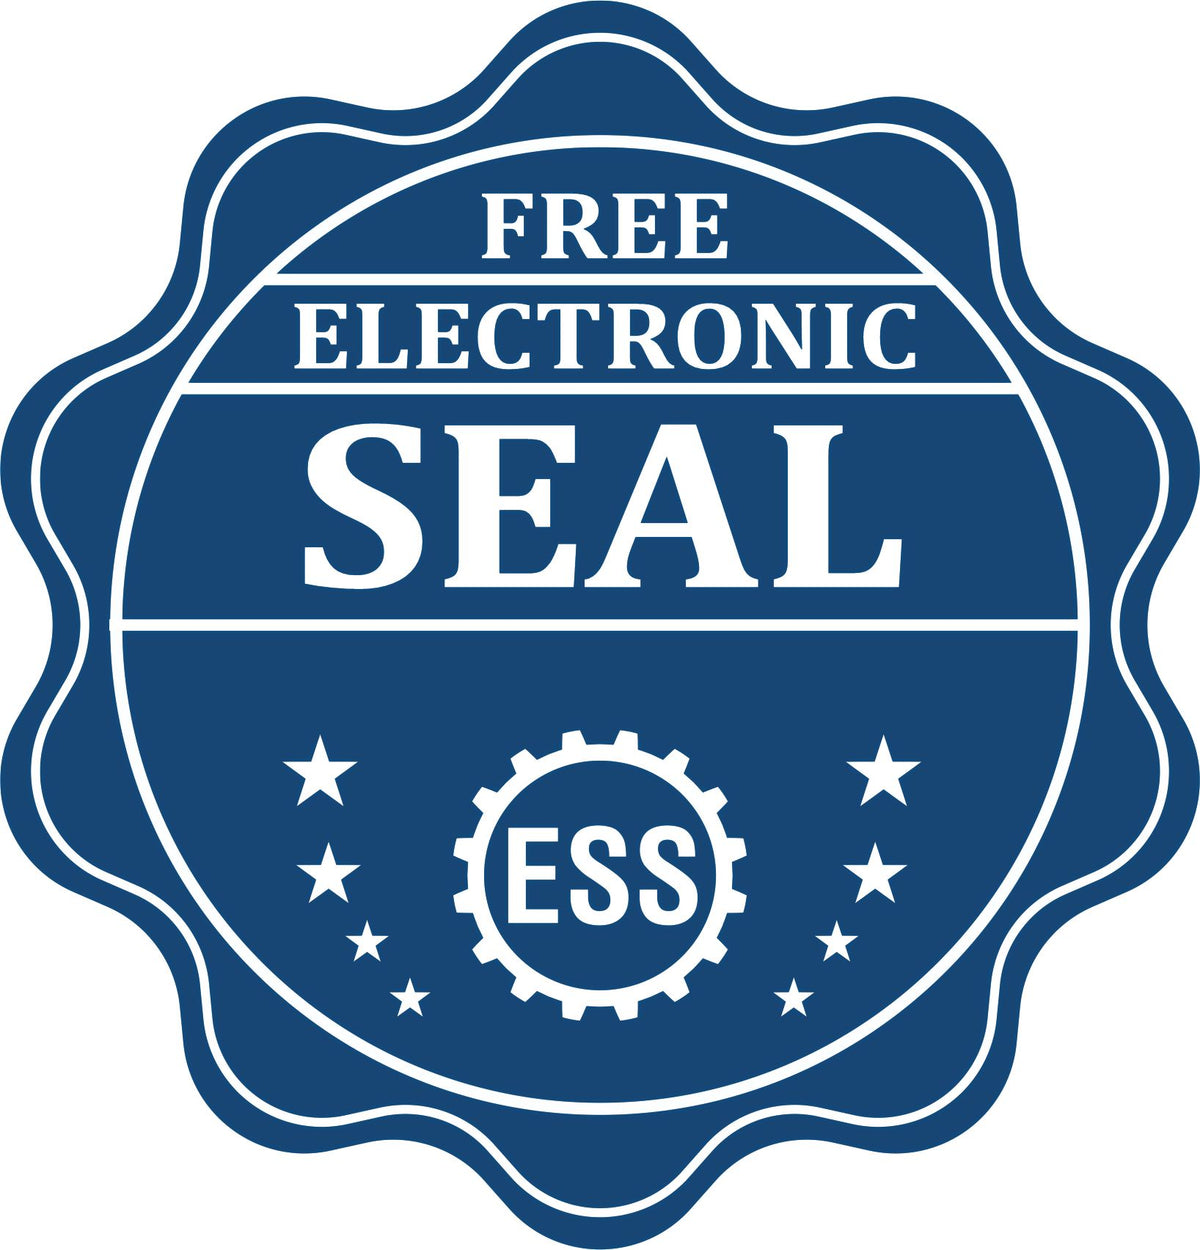 A badge showing a free electronic seal for the Handheld Mississippi Professional Geologist Embosser with stars and the ESS gear on the emblem.